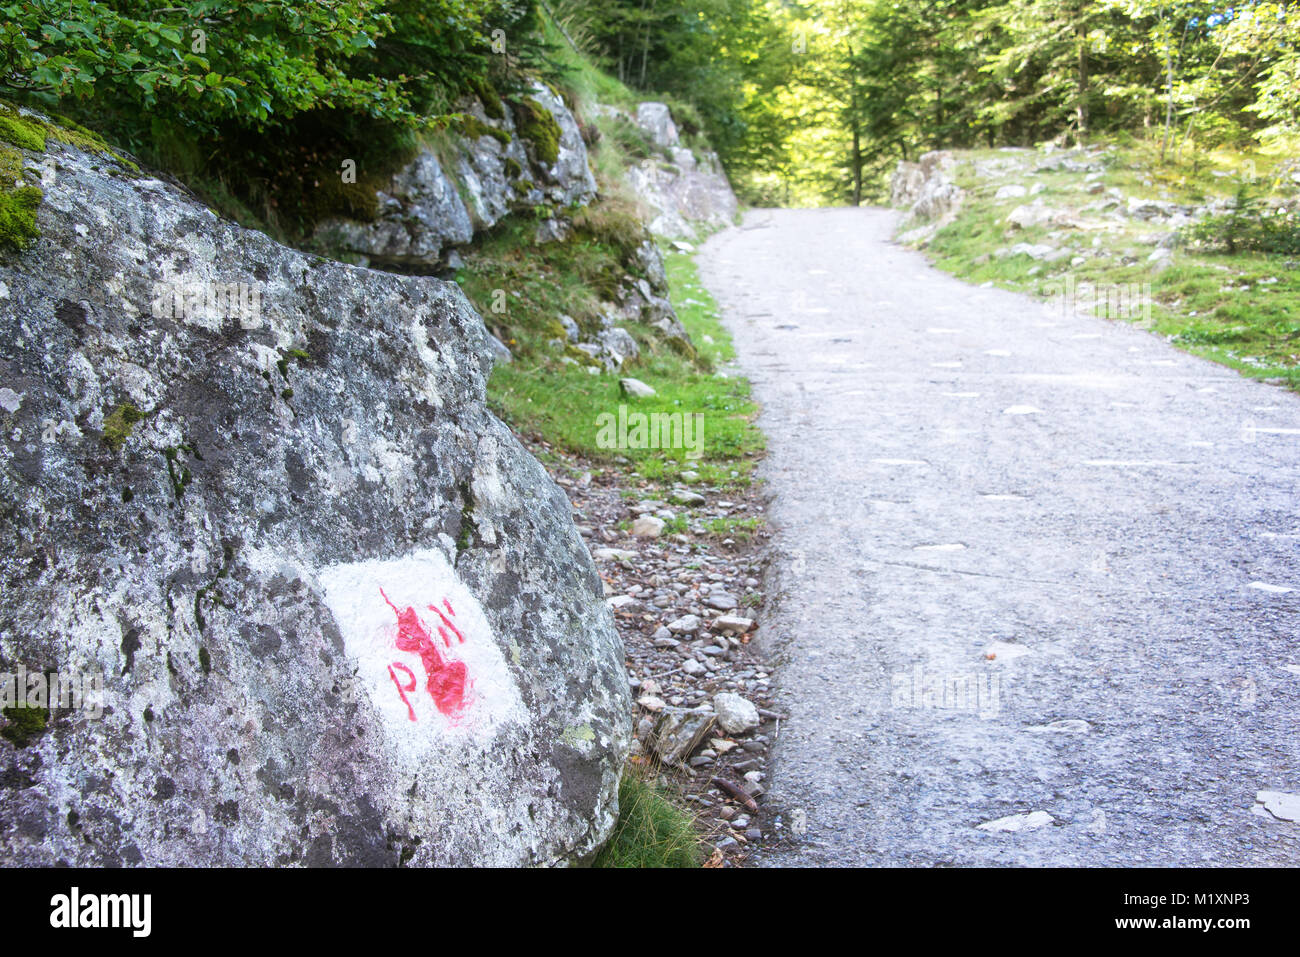 Symbol of the border of the Pyrenees National Park painted on a rock Stock Photo